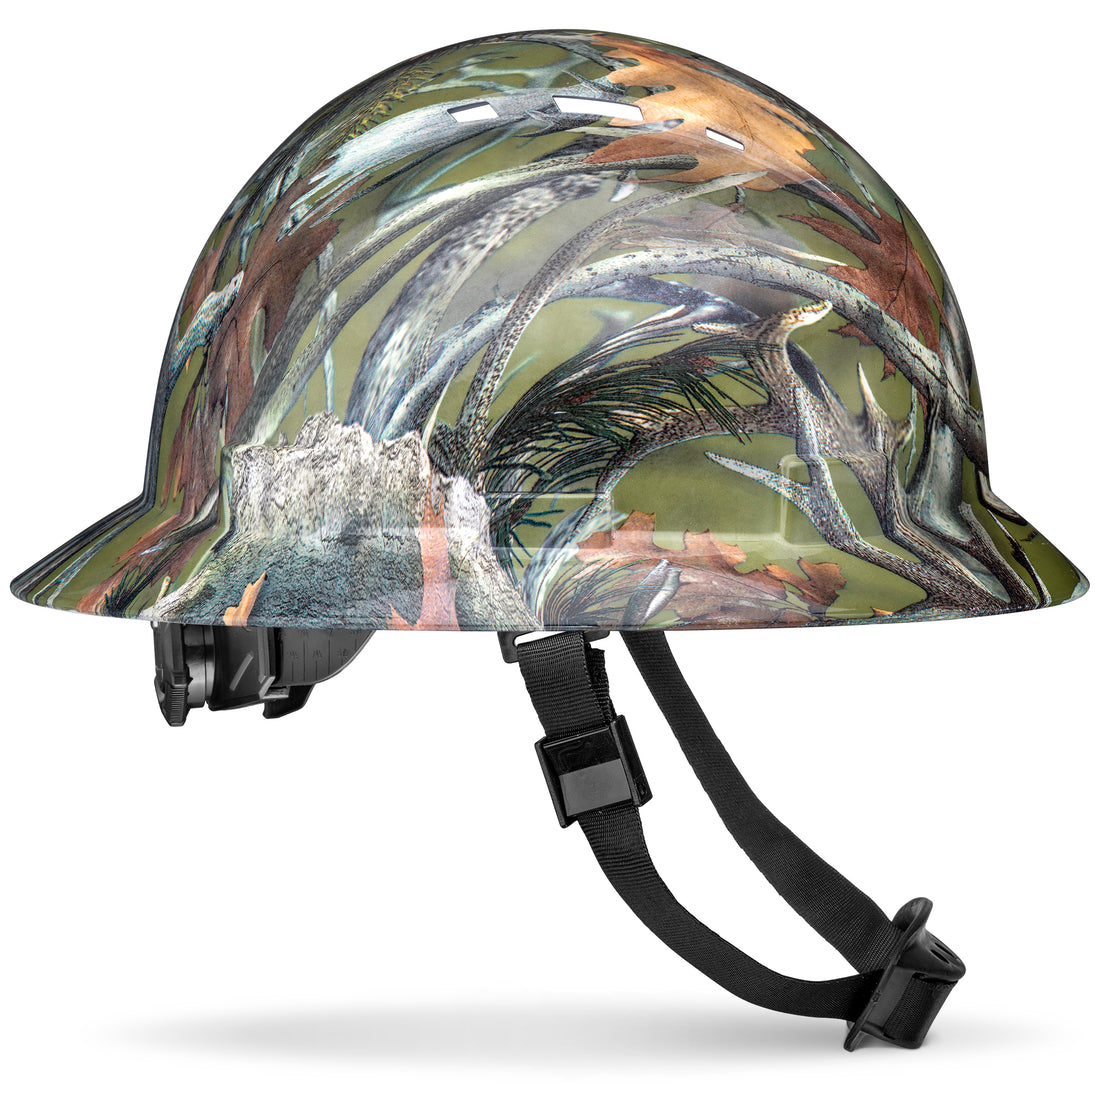 Full Brim Forest Fall Camo Gloss Finish Vented Hard Hat